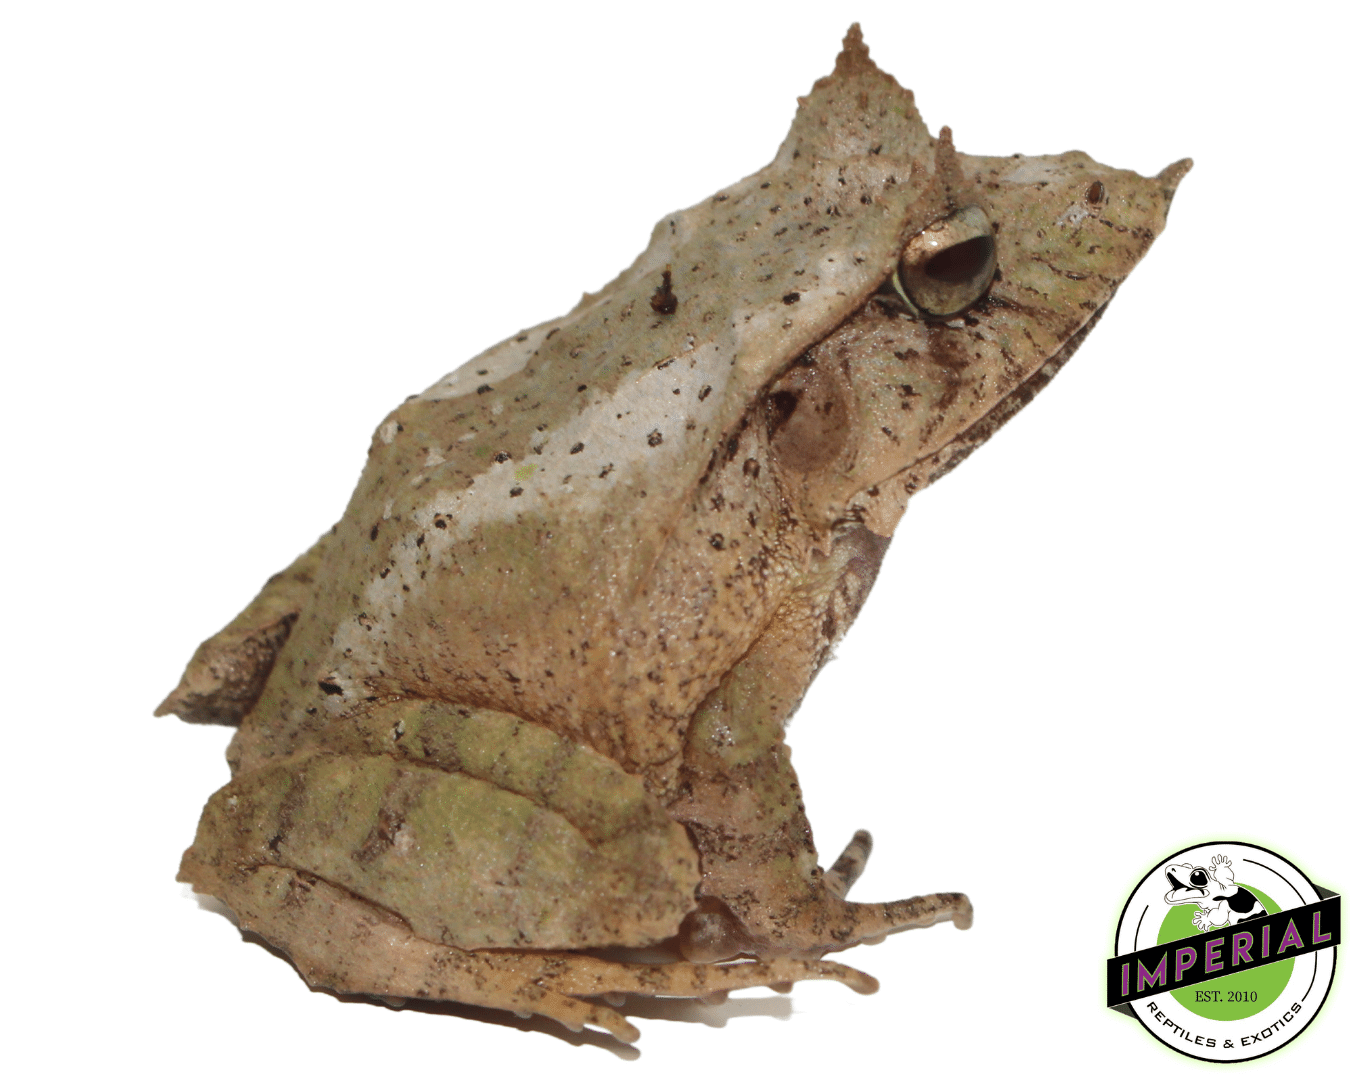 leaf frog for sale online at cheap prices